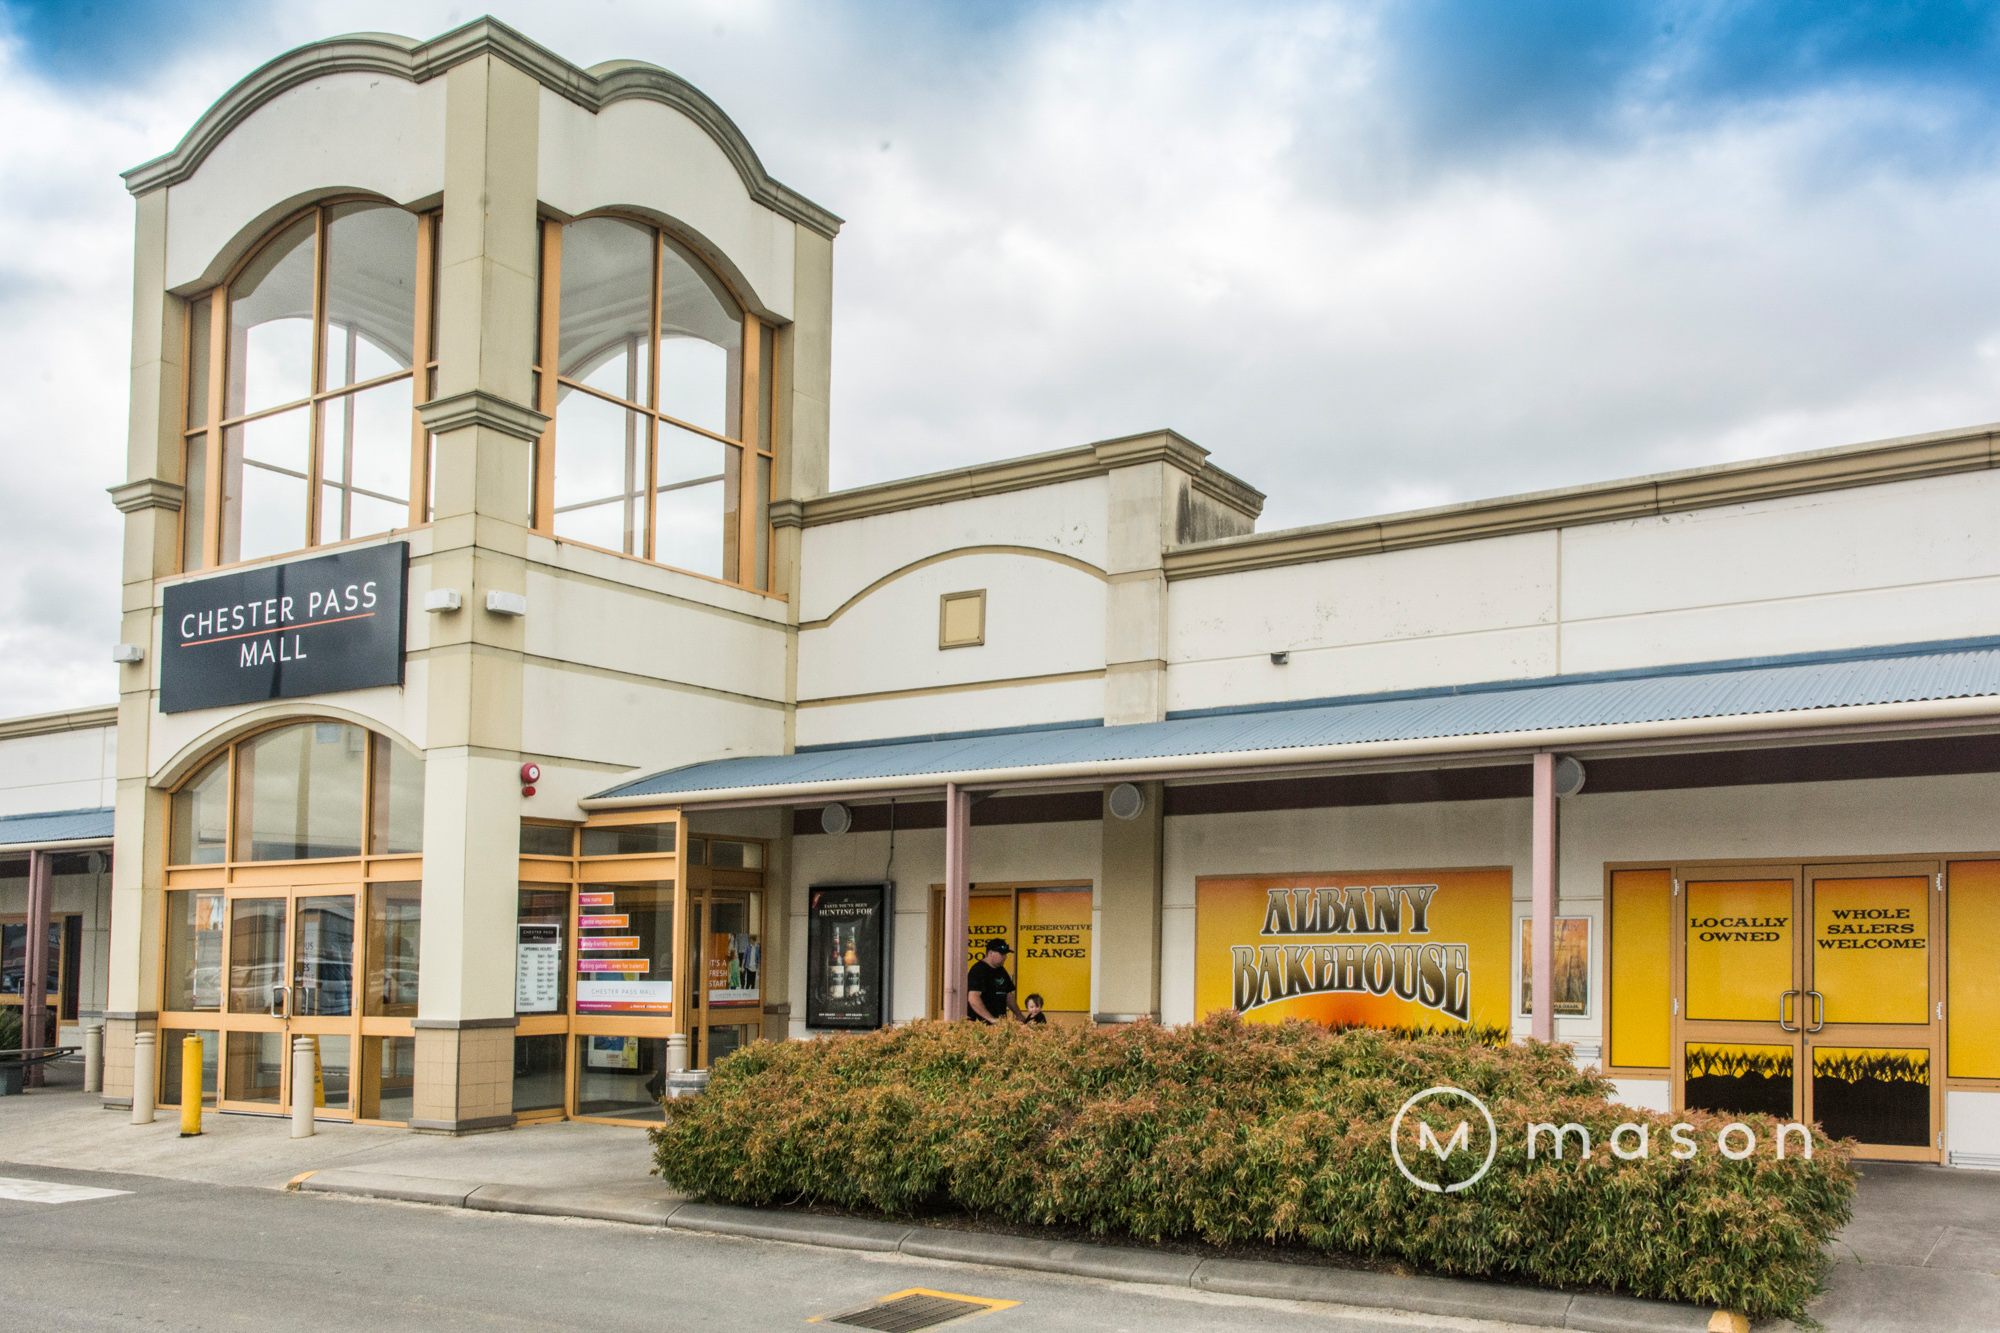 Albany Bakery For Sale - Shopping Centre Location thumbnail 2